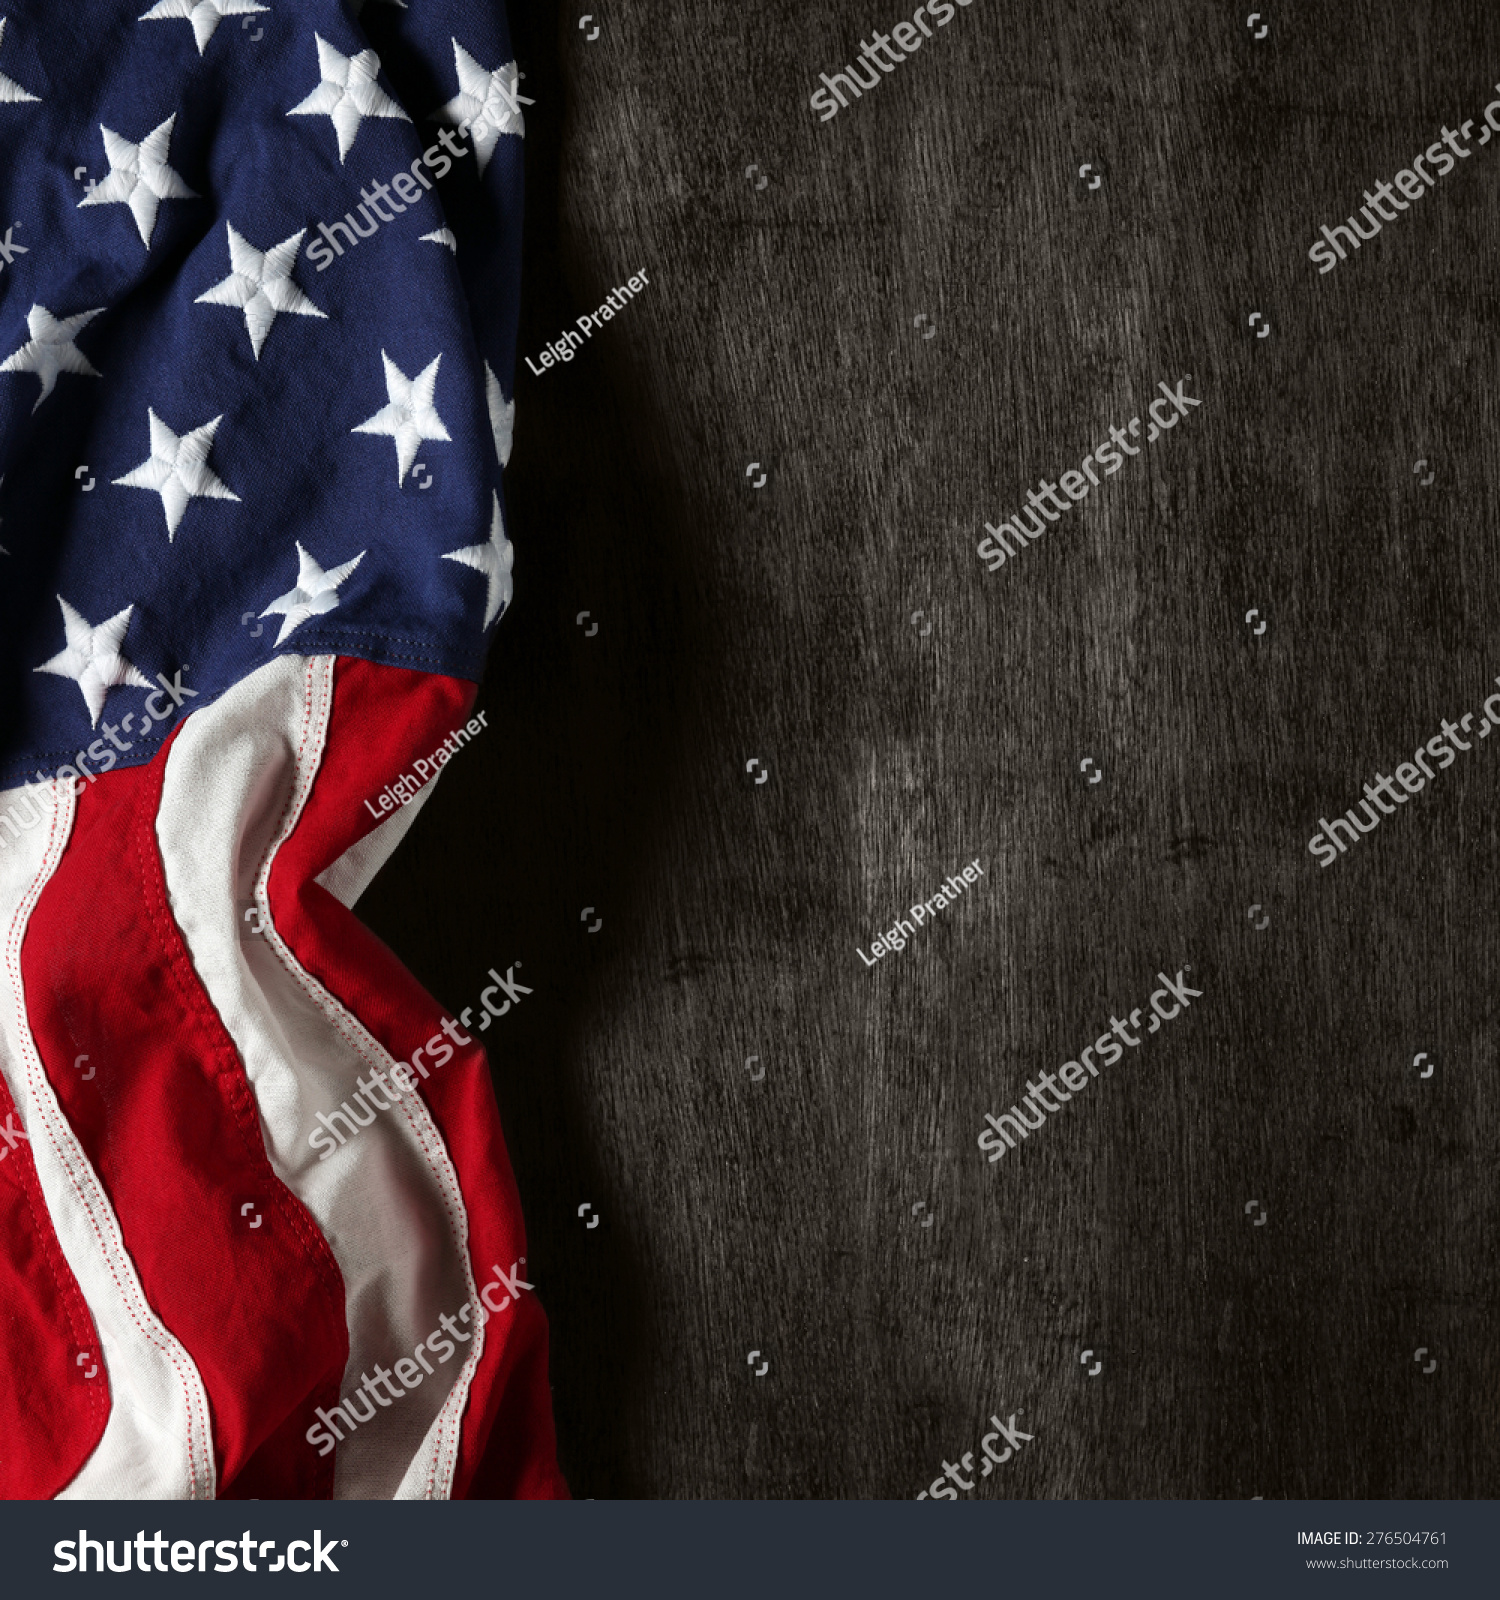 American flag for Memorial Day or 4th of July #276504761